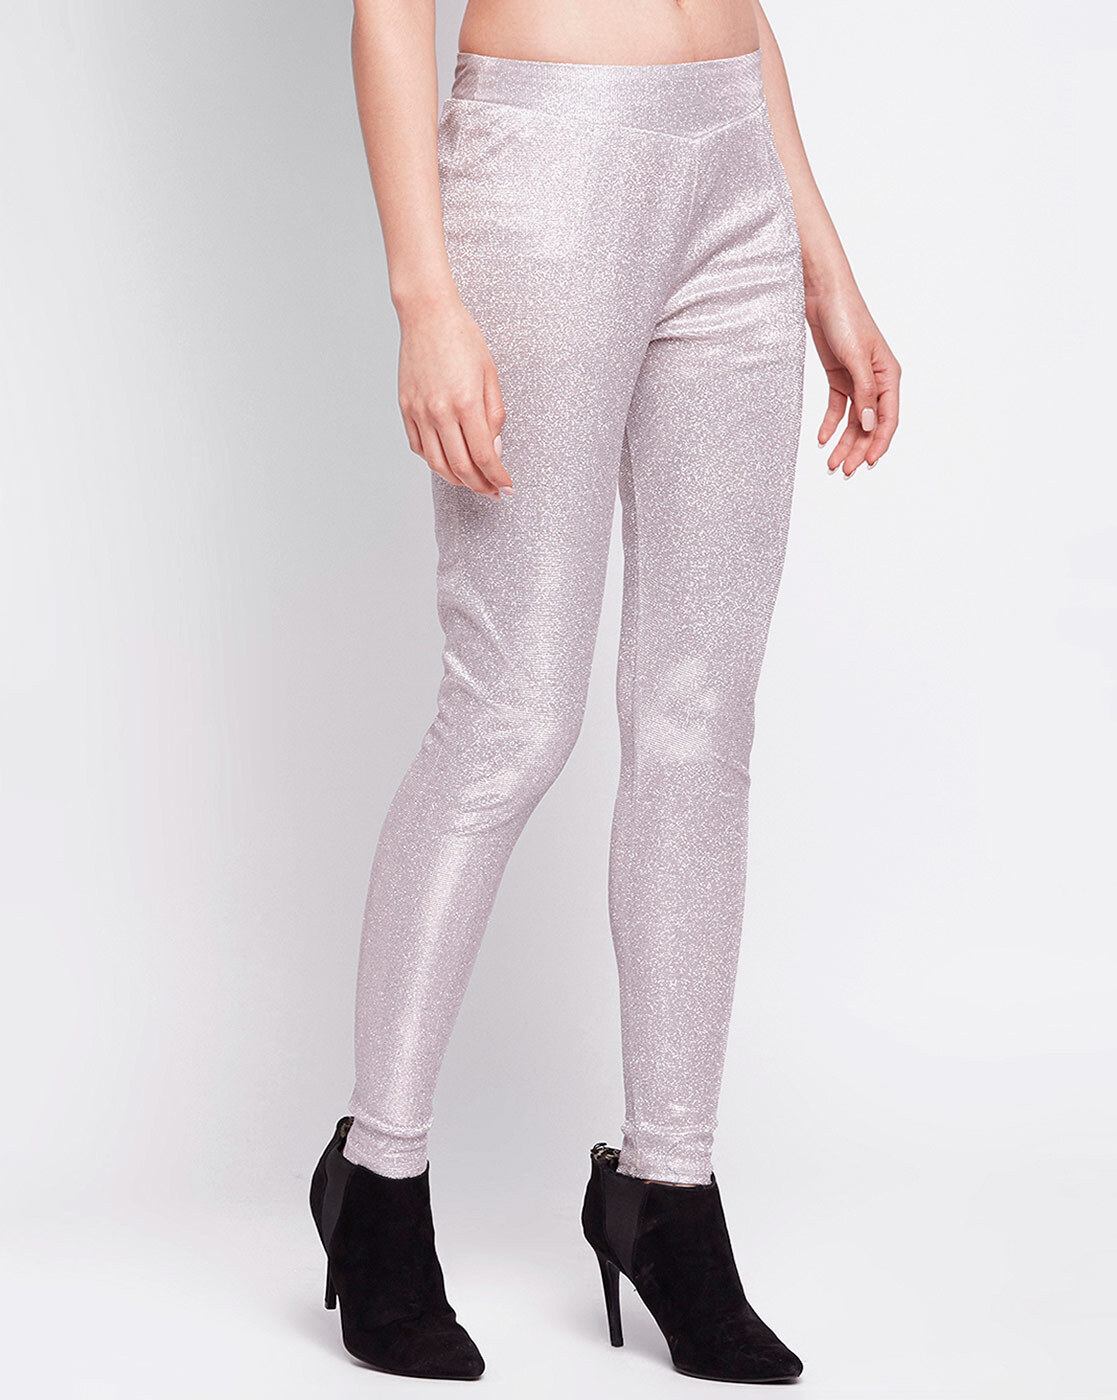 Flared sequined leggings - Silver-coloured/Sequins - Kids | H&M IN